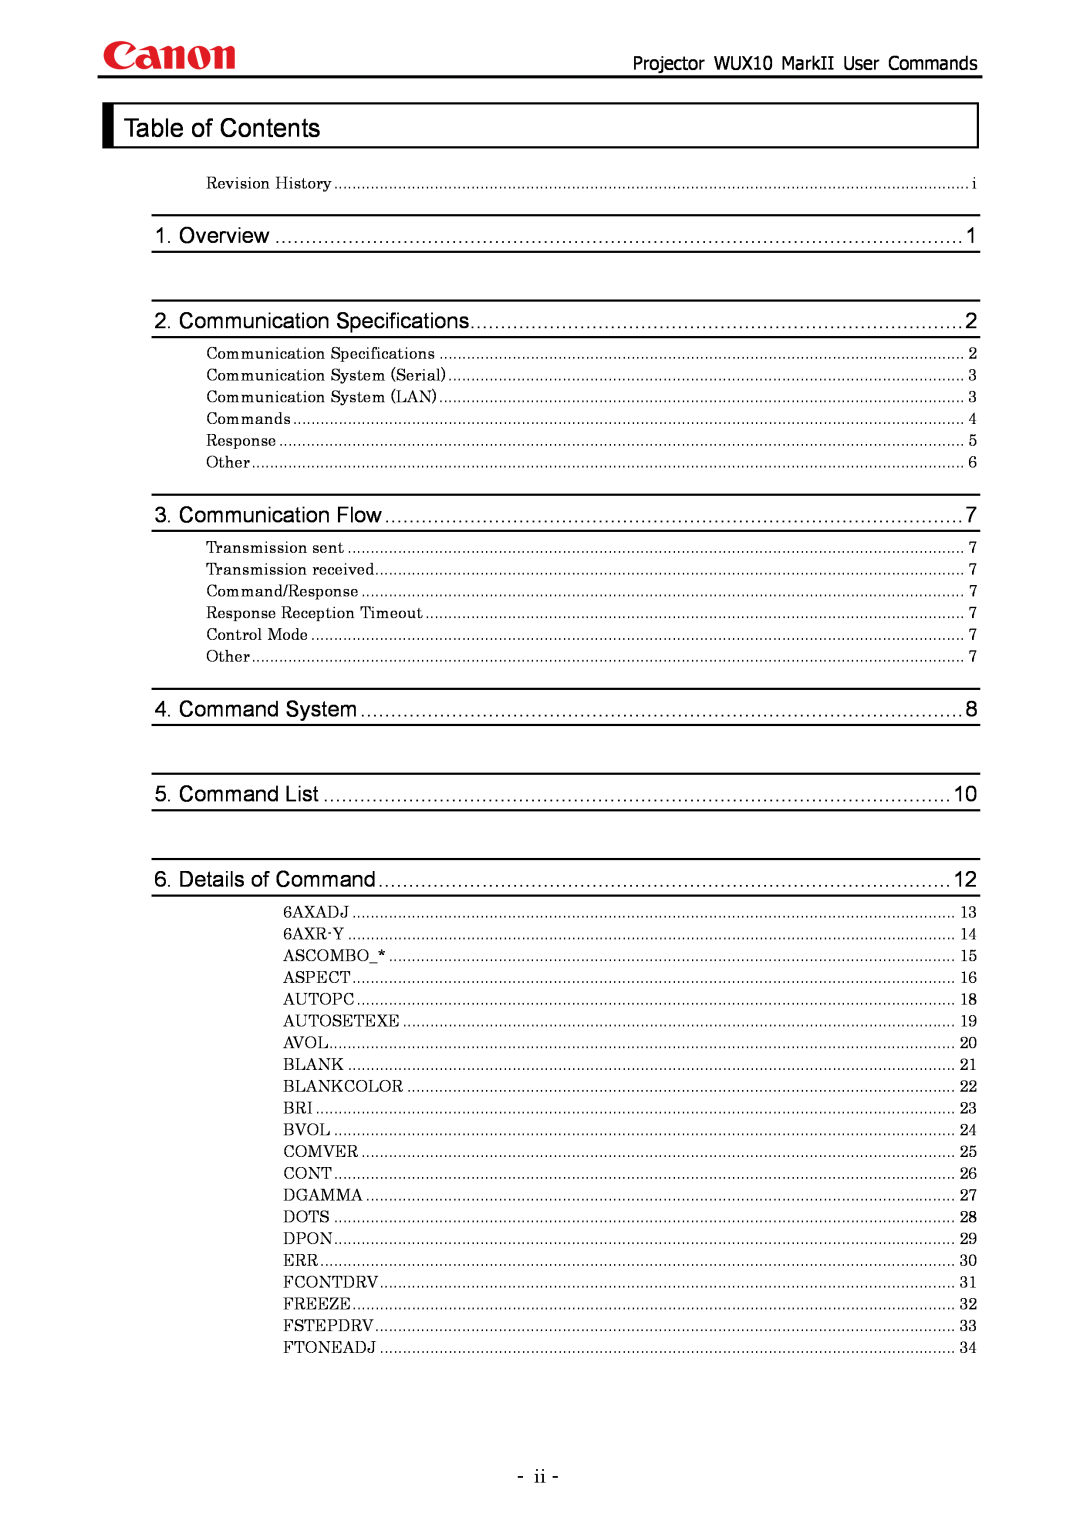 Canon WUX10 Table of Contents, Overview, Communication Specifications, Communication Flow, Command System, Command List 